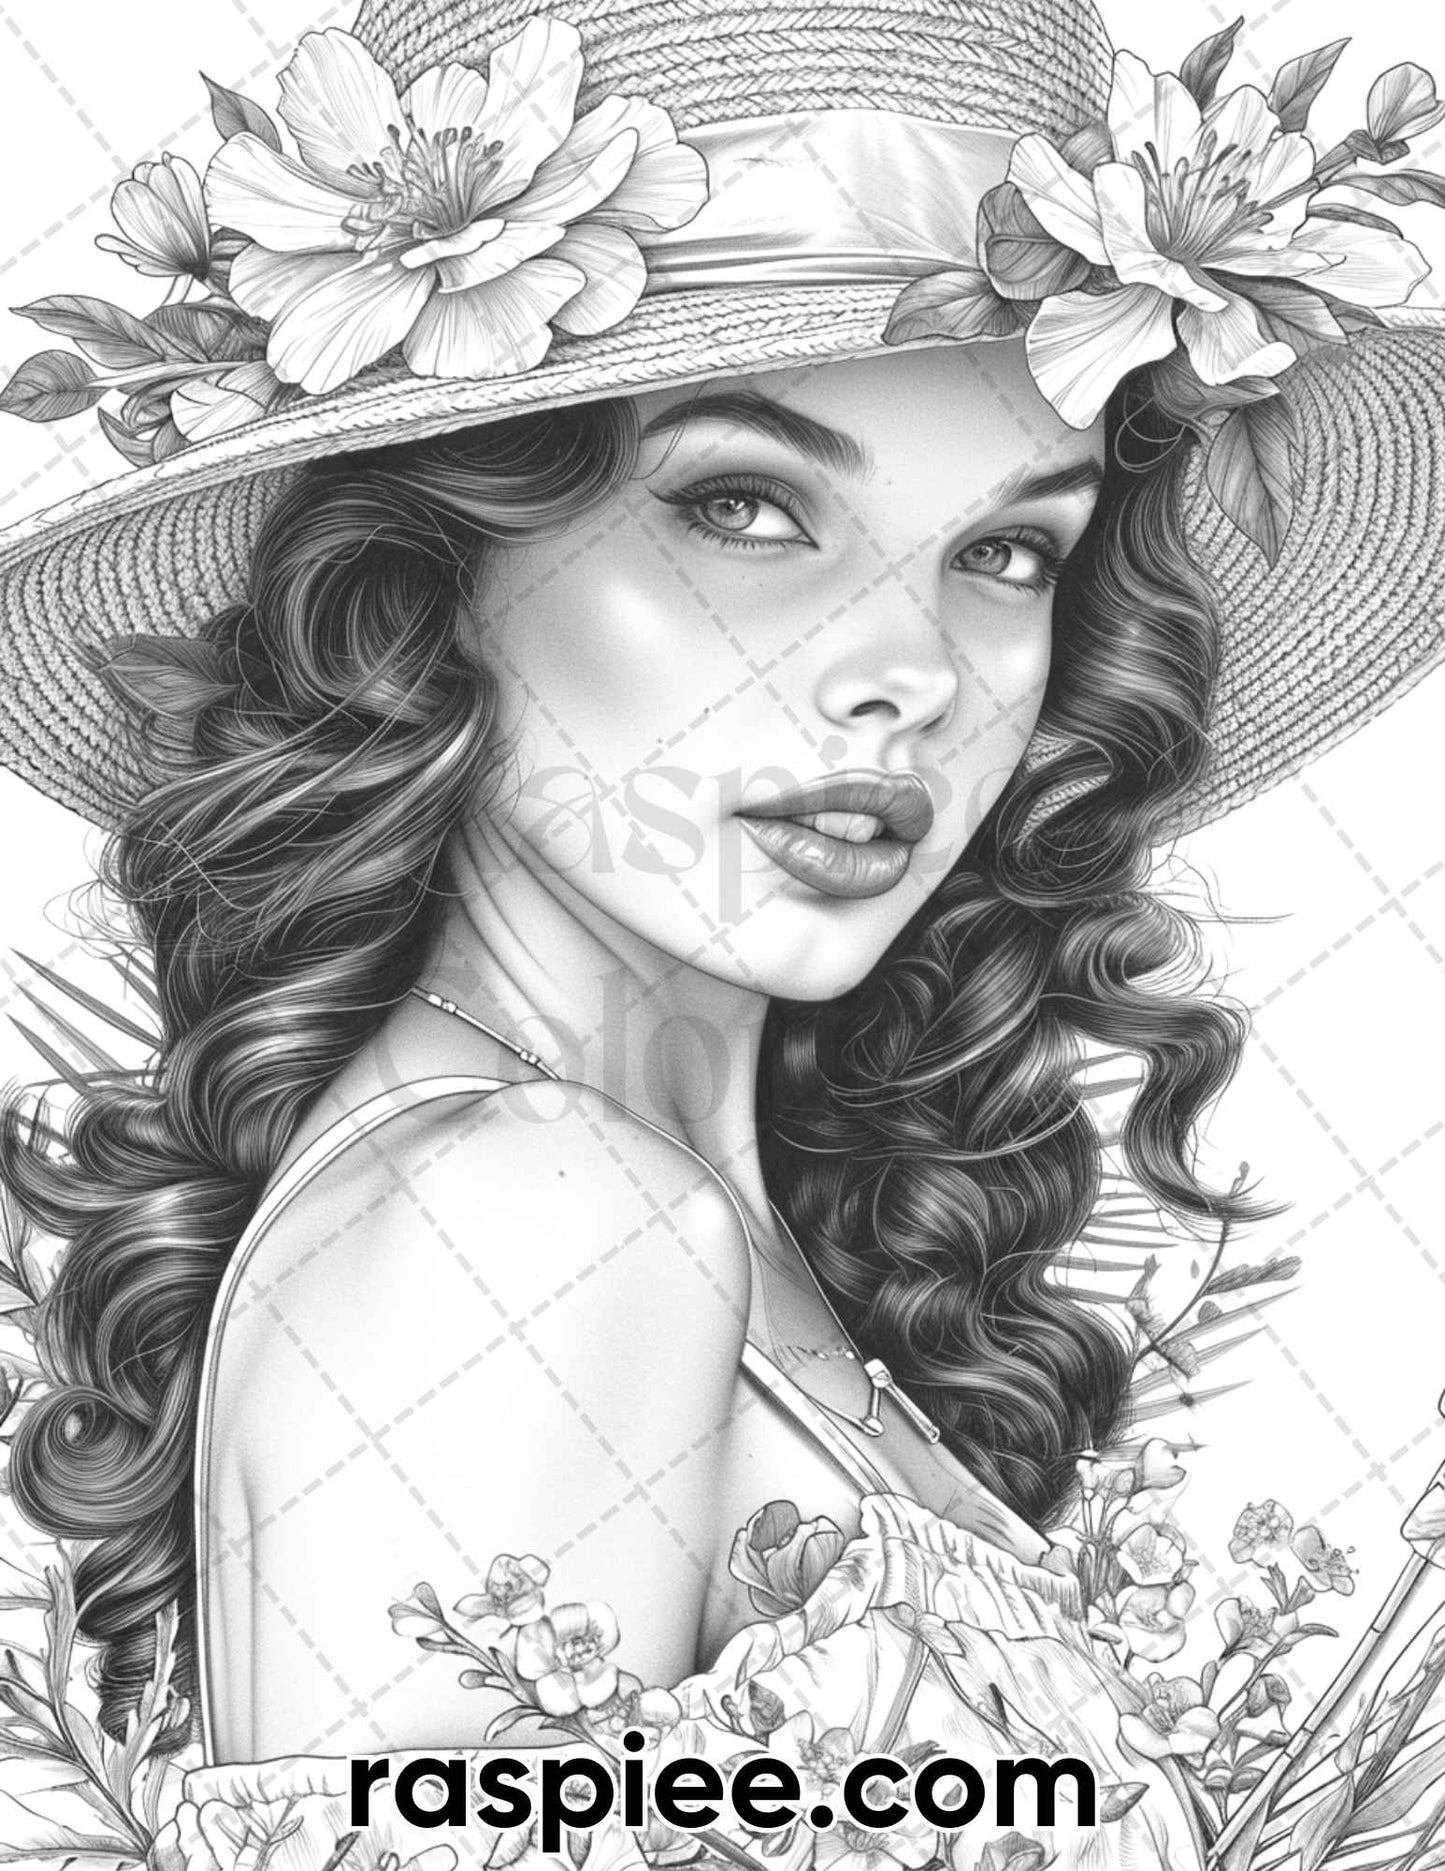 adult coloring pages, adult coloring sheets, adult coloring book pdf, adult coloring book printable, grayscale coloring pages, grayscale coloring books, spring coloring pages for adults, spring coloring book, portrait landscapes coloring pages, portrait coloring book, vintage pin up girls coloring page